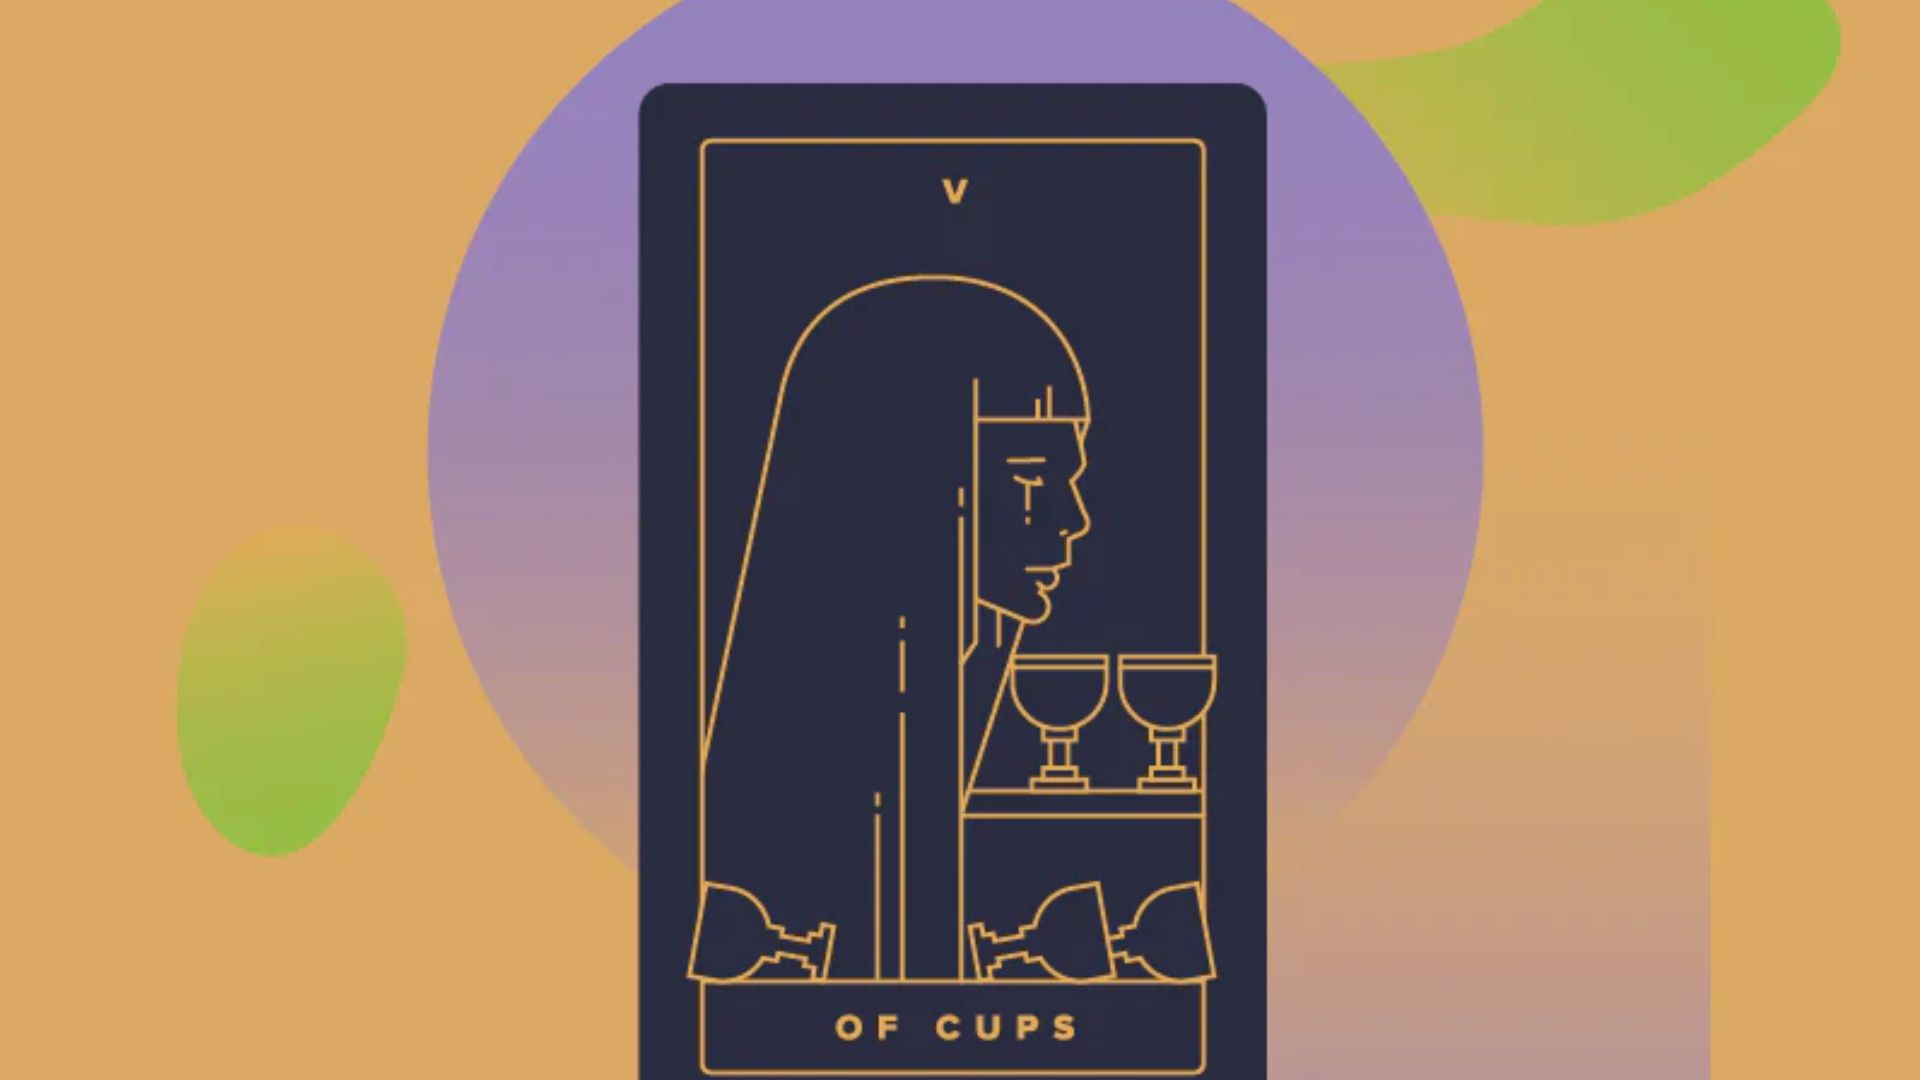 Black And Golden 5 Of Cups Tarot Card